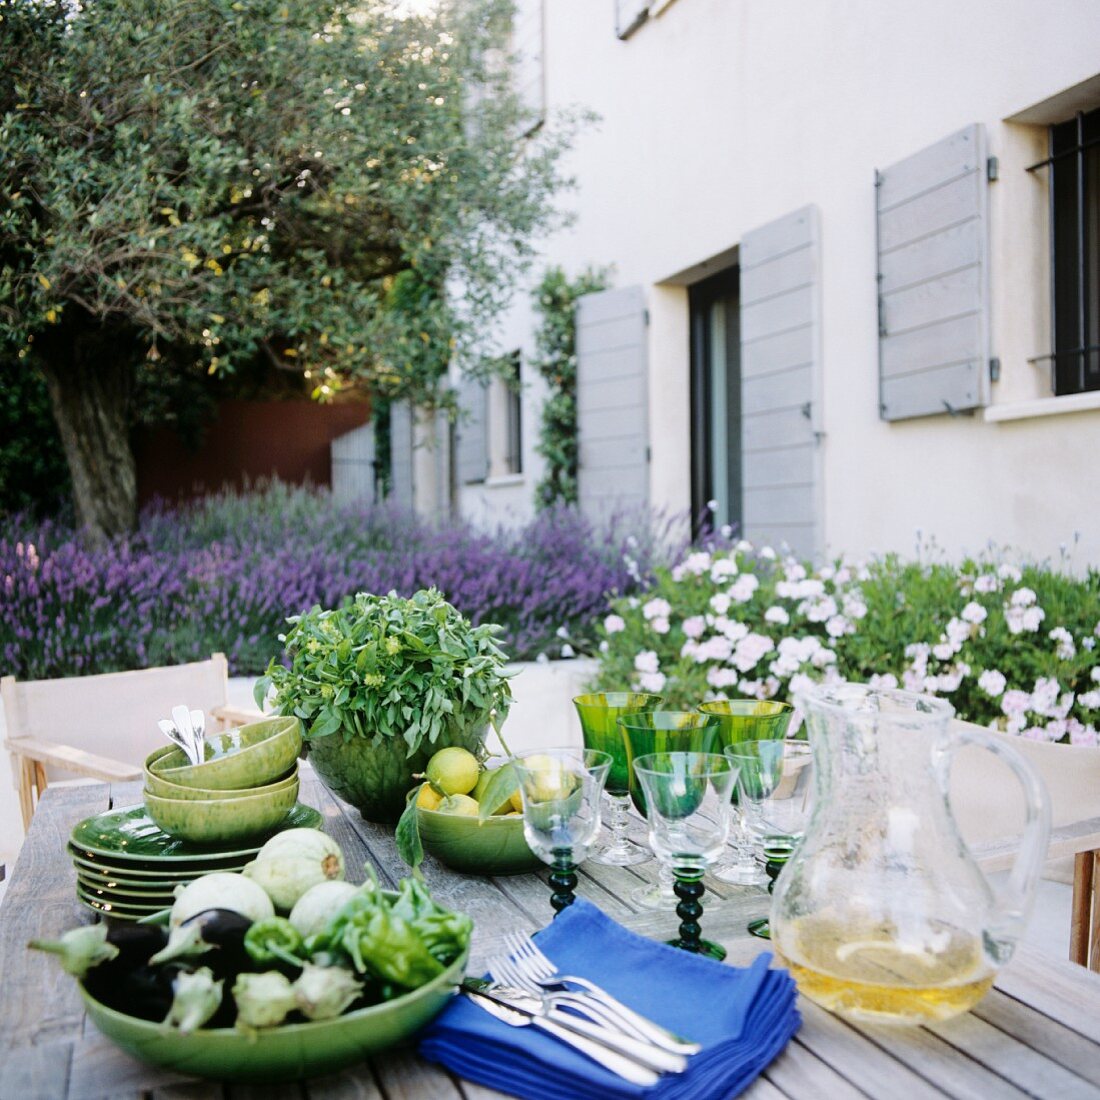 Aubergines, herbs and cutlery on wooden table outside modern Mediterranean holiday home; flowering lavender in background